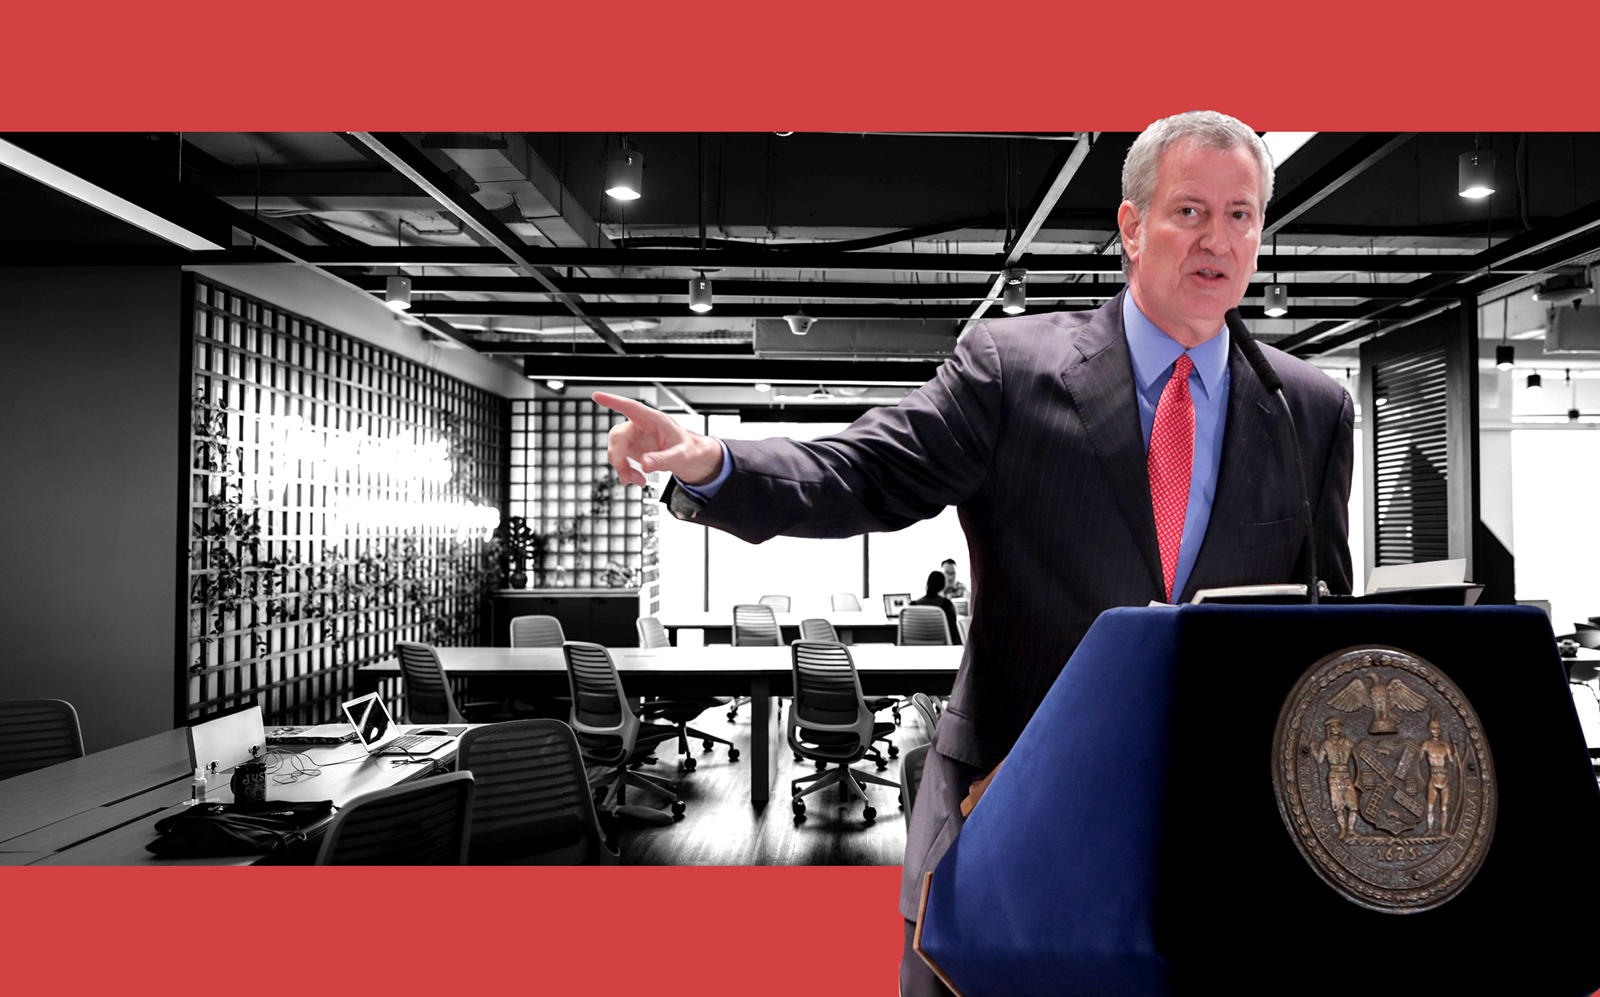 Following pressure from business leaders, Mayor Bill de Blasio calls for the return to the office (Getty)